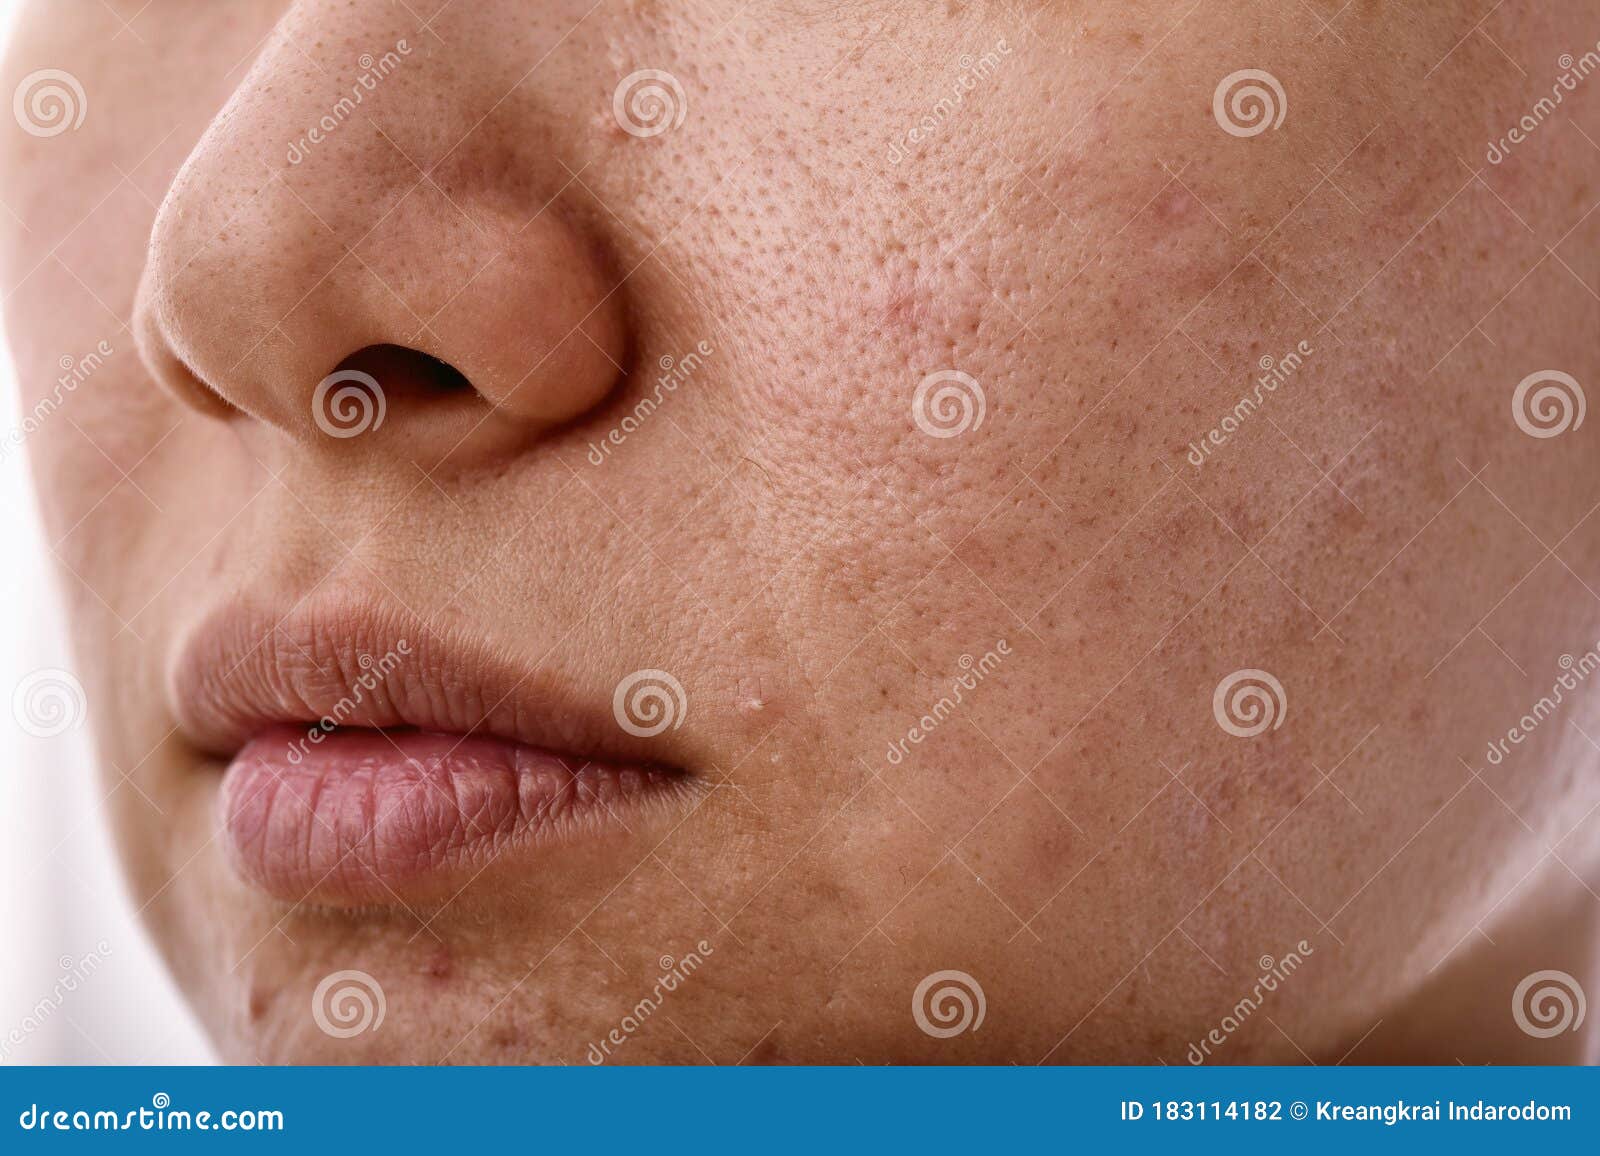 skin problem with acne diseases, close up woman face with whitehead pimples on mouth.